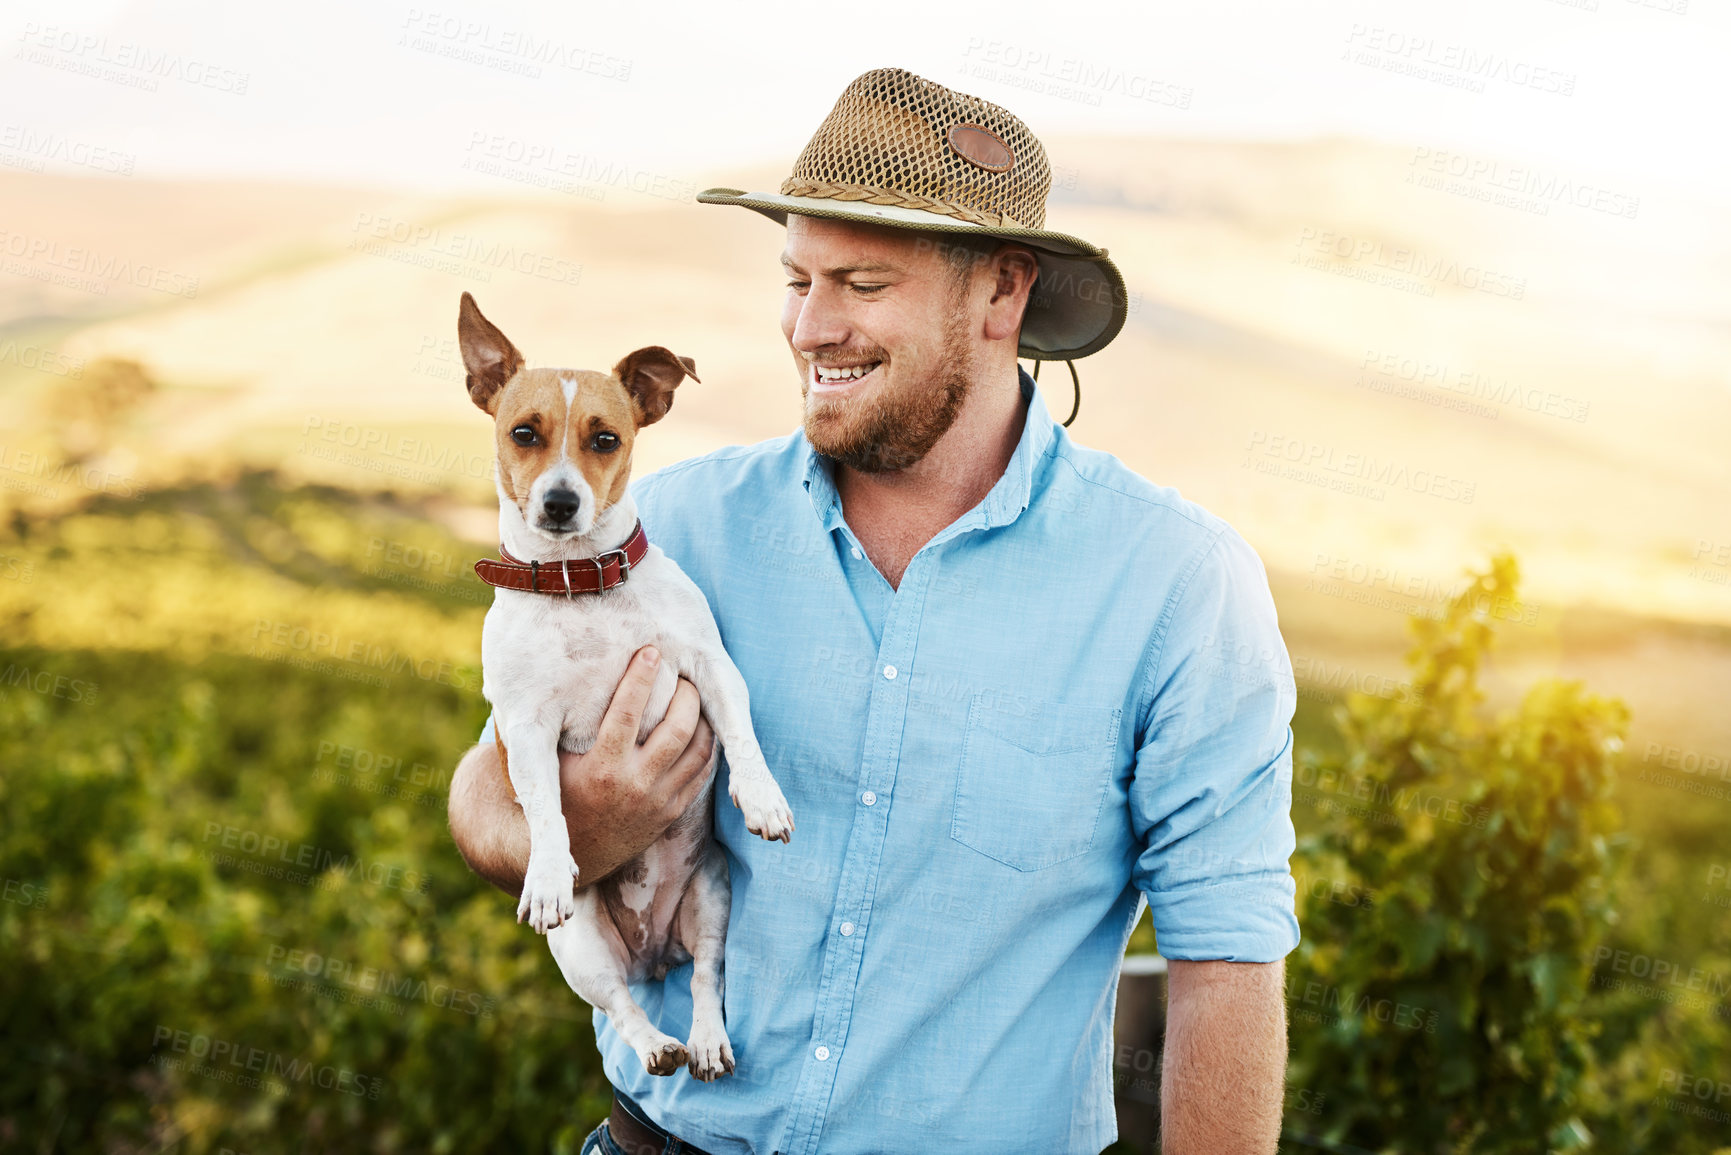 Buy stock photo Shot of a farmer holding his dog in a vineyard